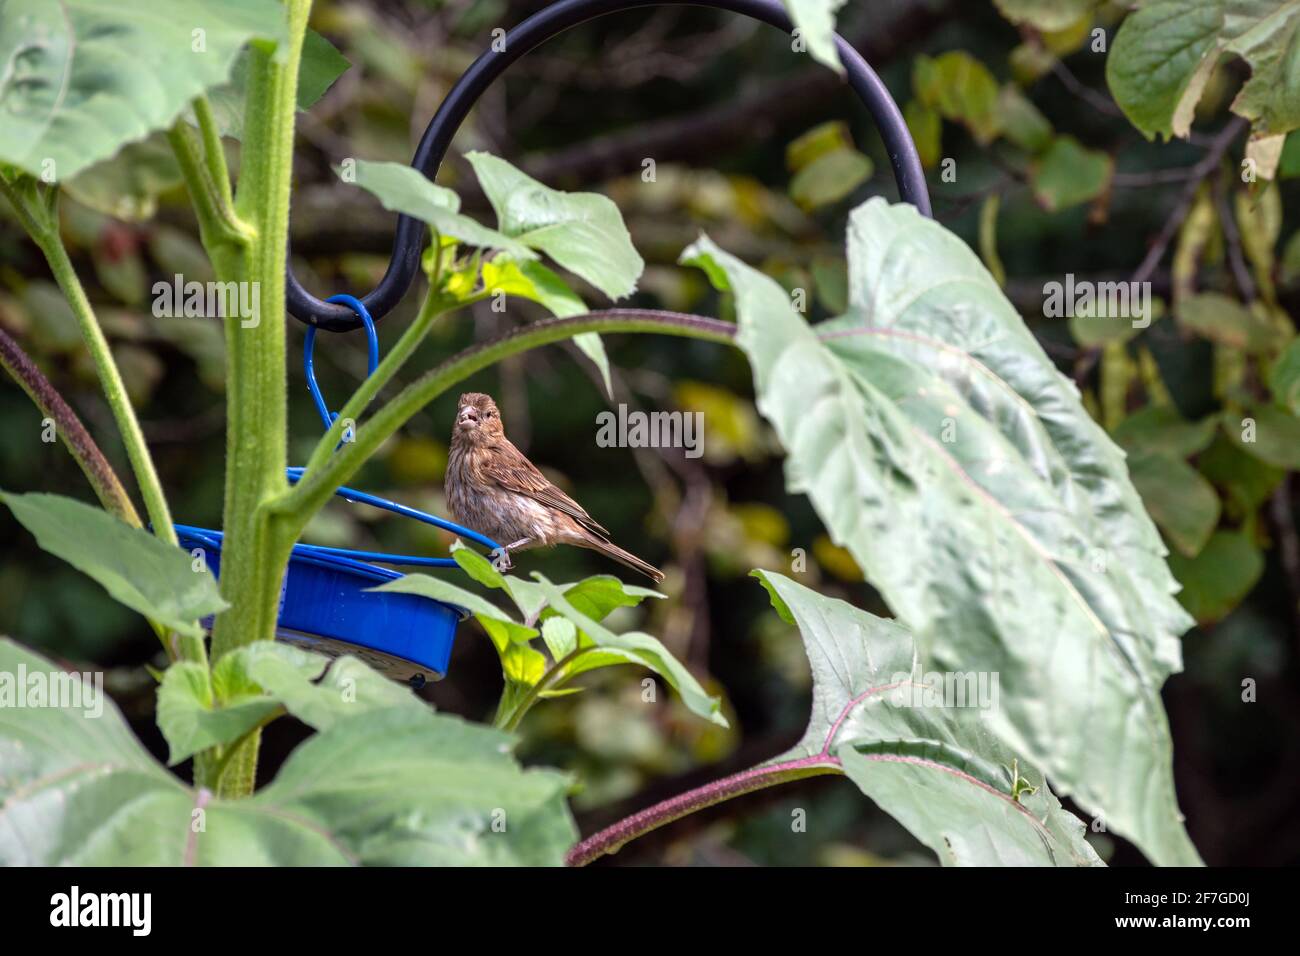 A small brown house finch holds a seed in its mouth as it is perched on a feeder amongst a large plant leaves with bokeh effect. Stock Photo